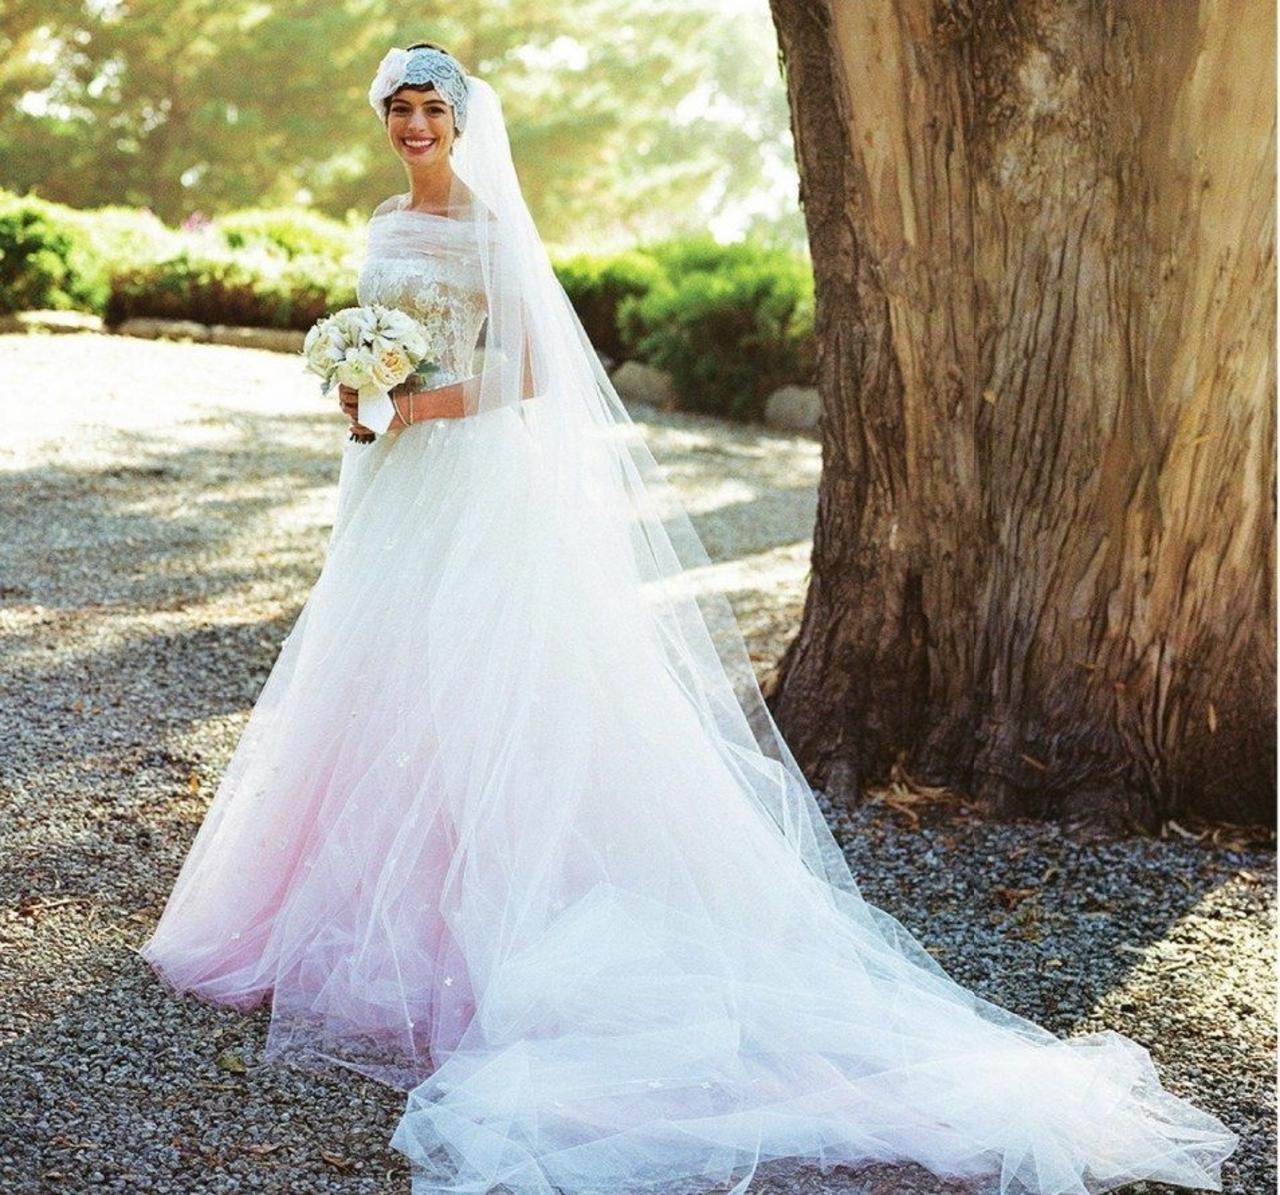 Anne Hathaway married Adam Shulman wearing a custom-made Valentino gown for their big day in Big Sur, California. It was an off-the-shoulder dress with intricate lace and embroidery paired with a full-length veil and headpiece that exuded vintage vibes. 